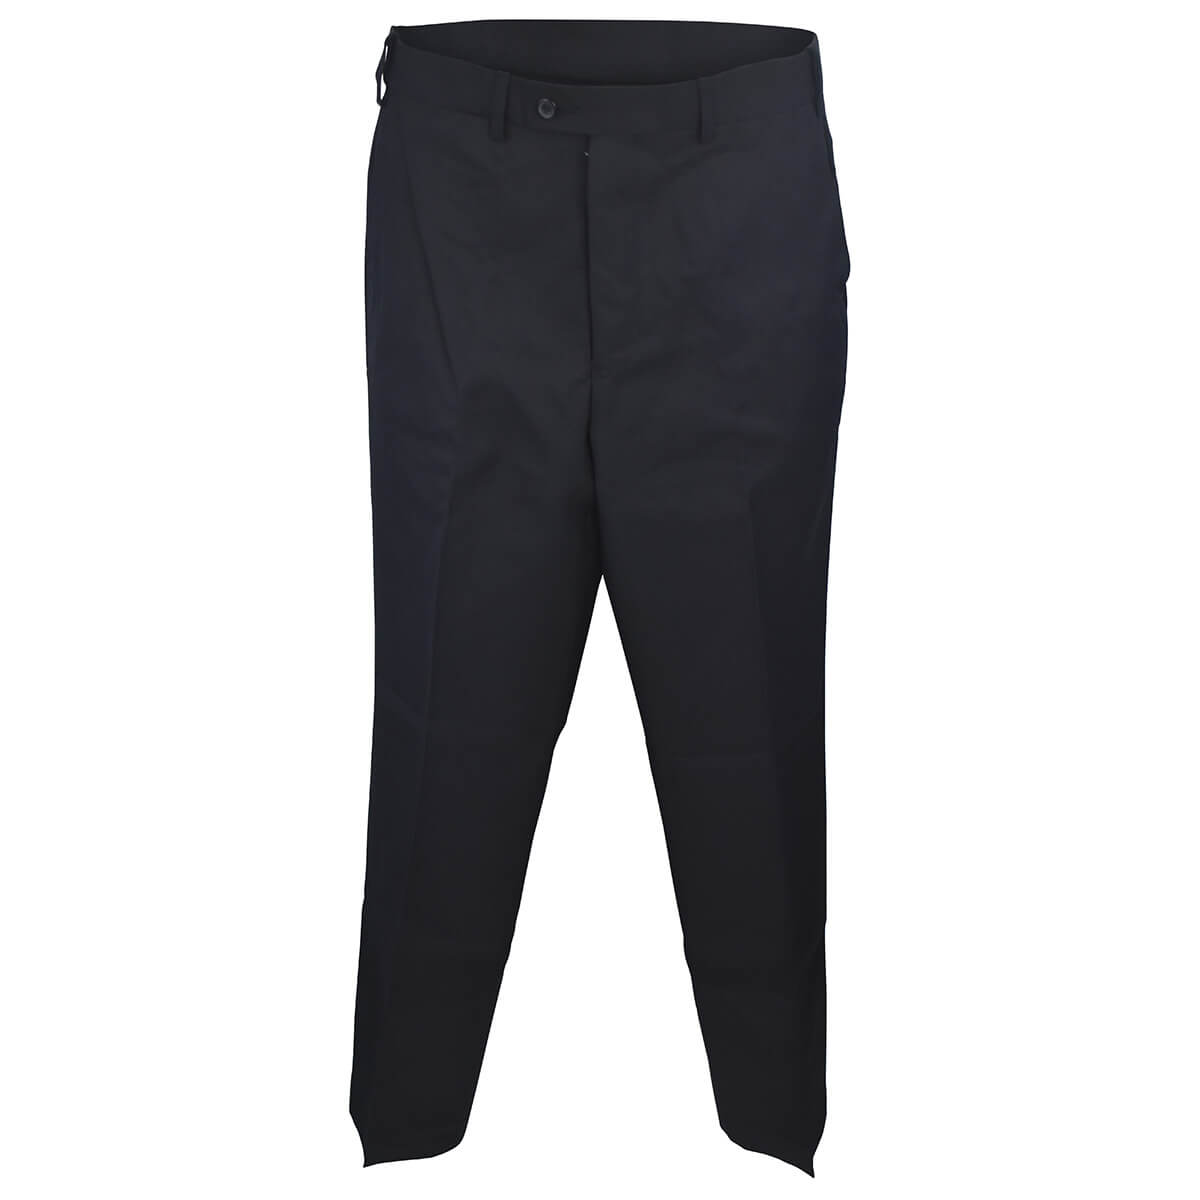 Trouser 115 Youth Size | Taylors Lakes Secondary College | Noone